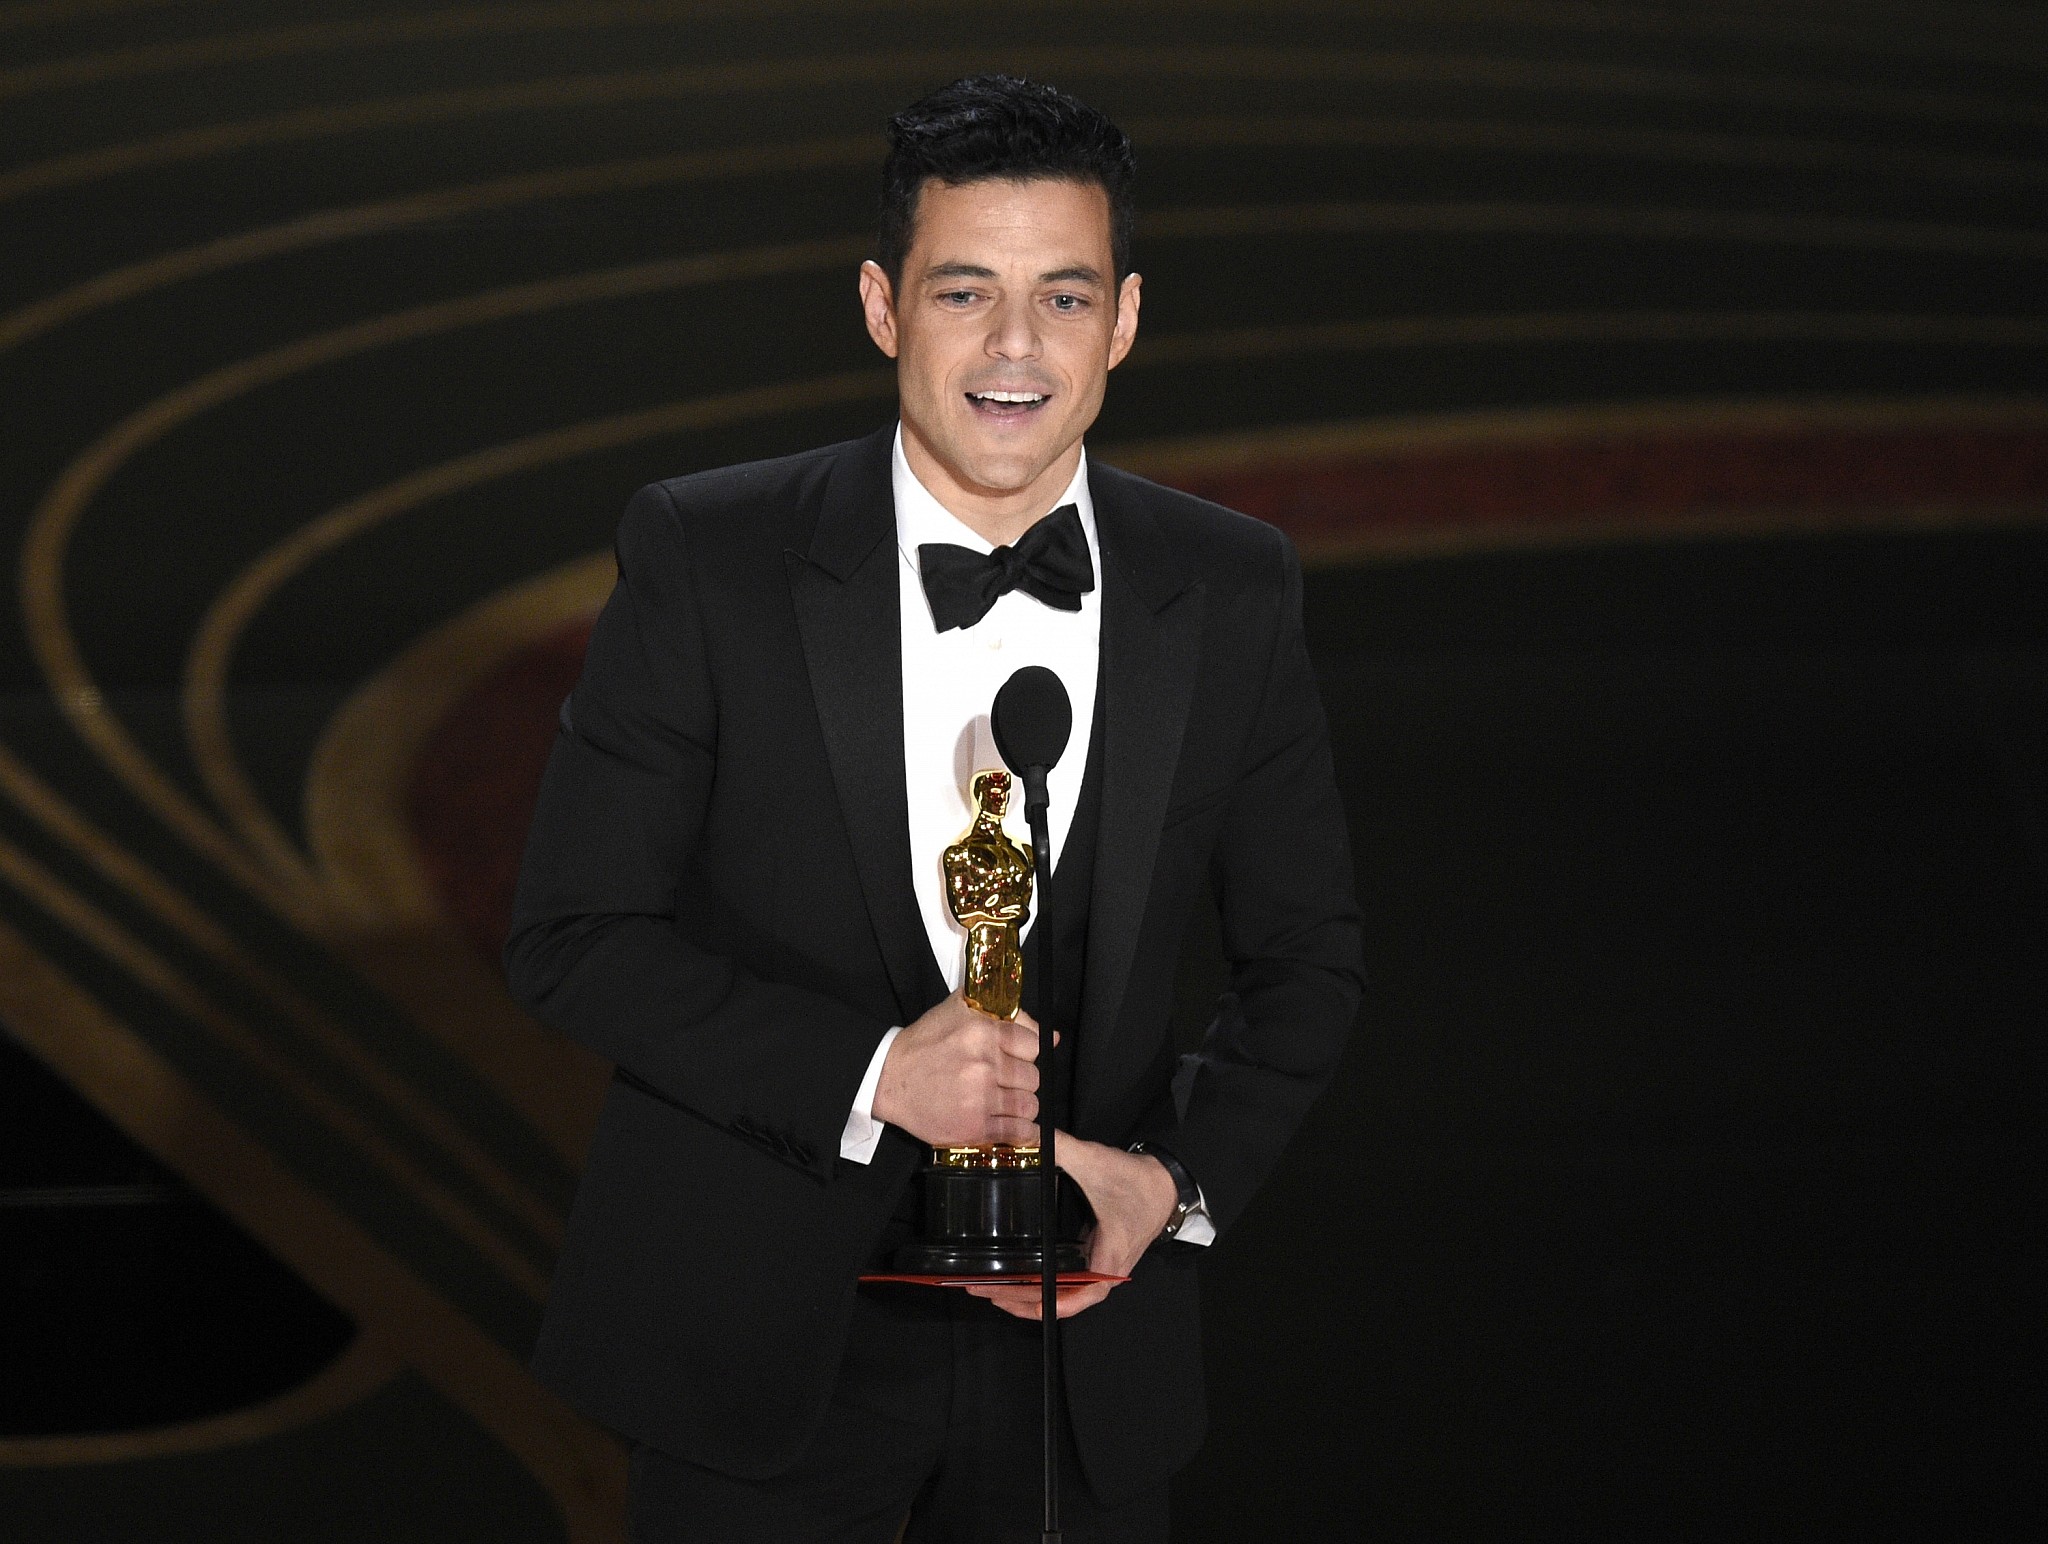 rami-malek-becomes-first-arab-american-to-win-best-actor-oscar-the